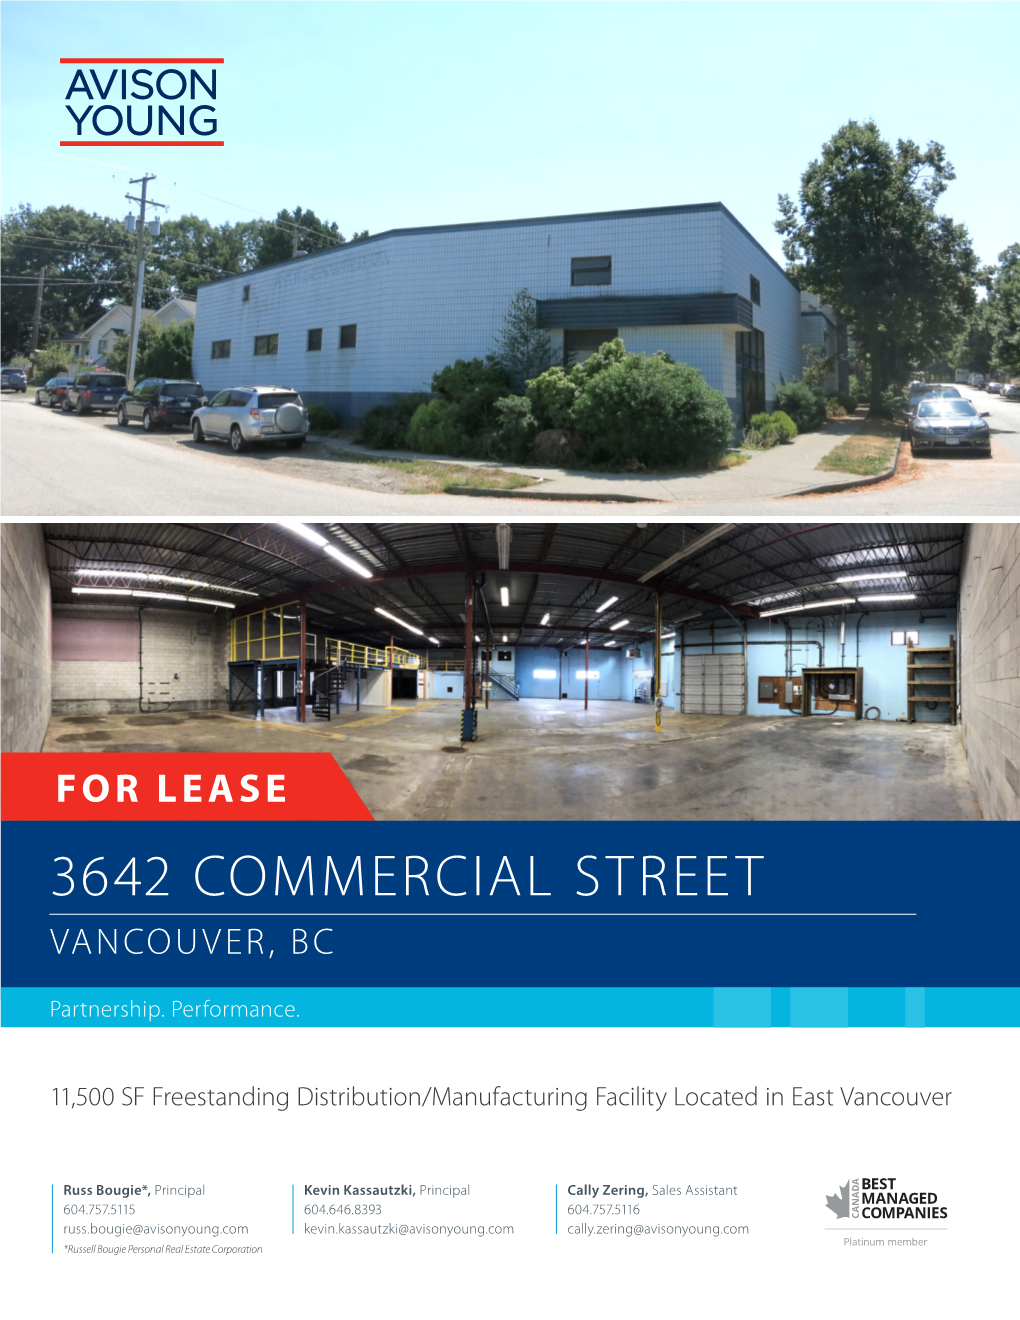 3642 Commercial Street Vancouver, Bc